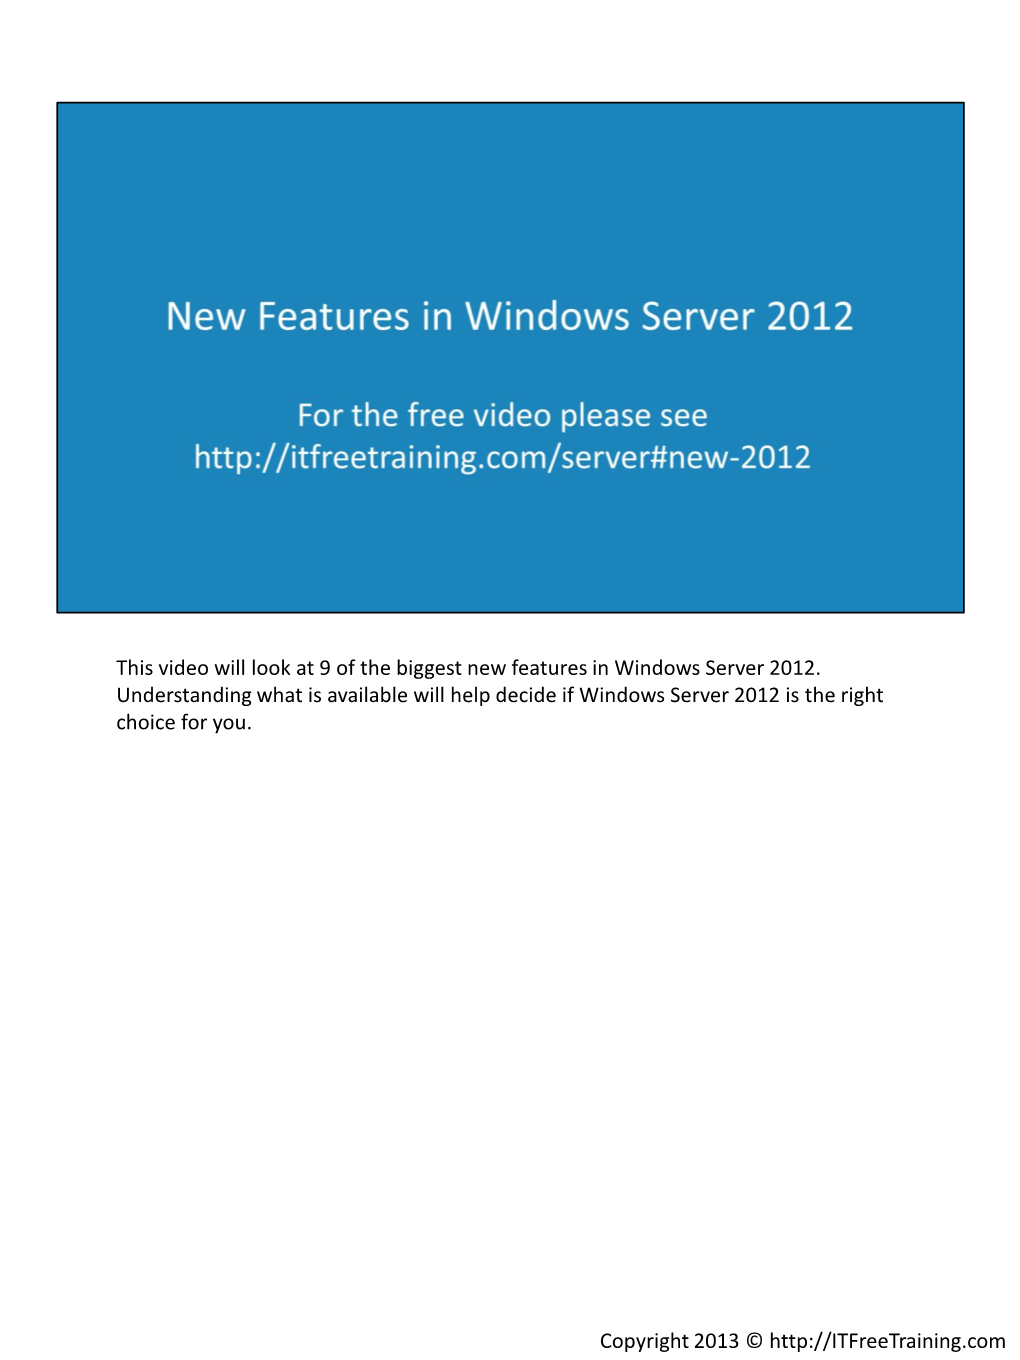 This Video Will Look at 9 of the Biggest New Features in Windows Server 2012